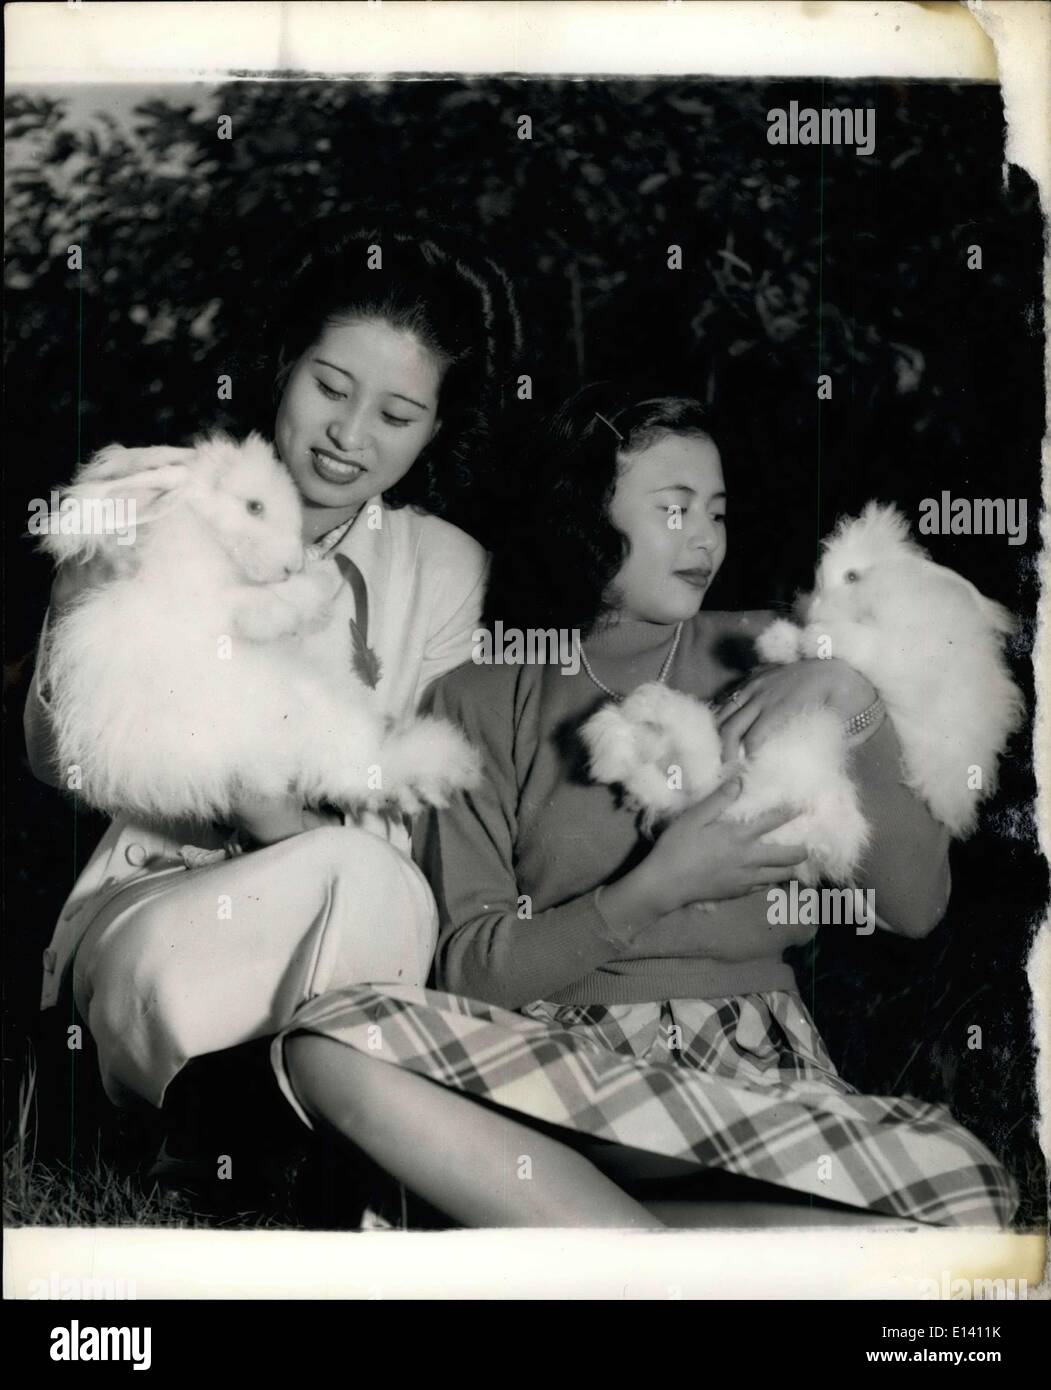 Mar. 31, 2012 - Two Beauties: Two lovely Angora rabbits belongings to Tomiko Yamada's farm are mursed by to equally lovely Japanese girls. Stock Photo